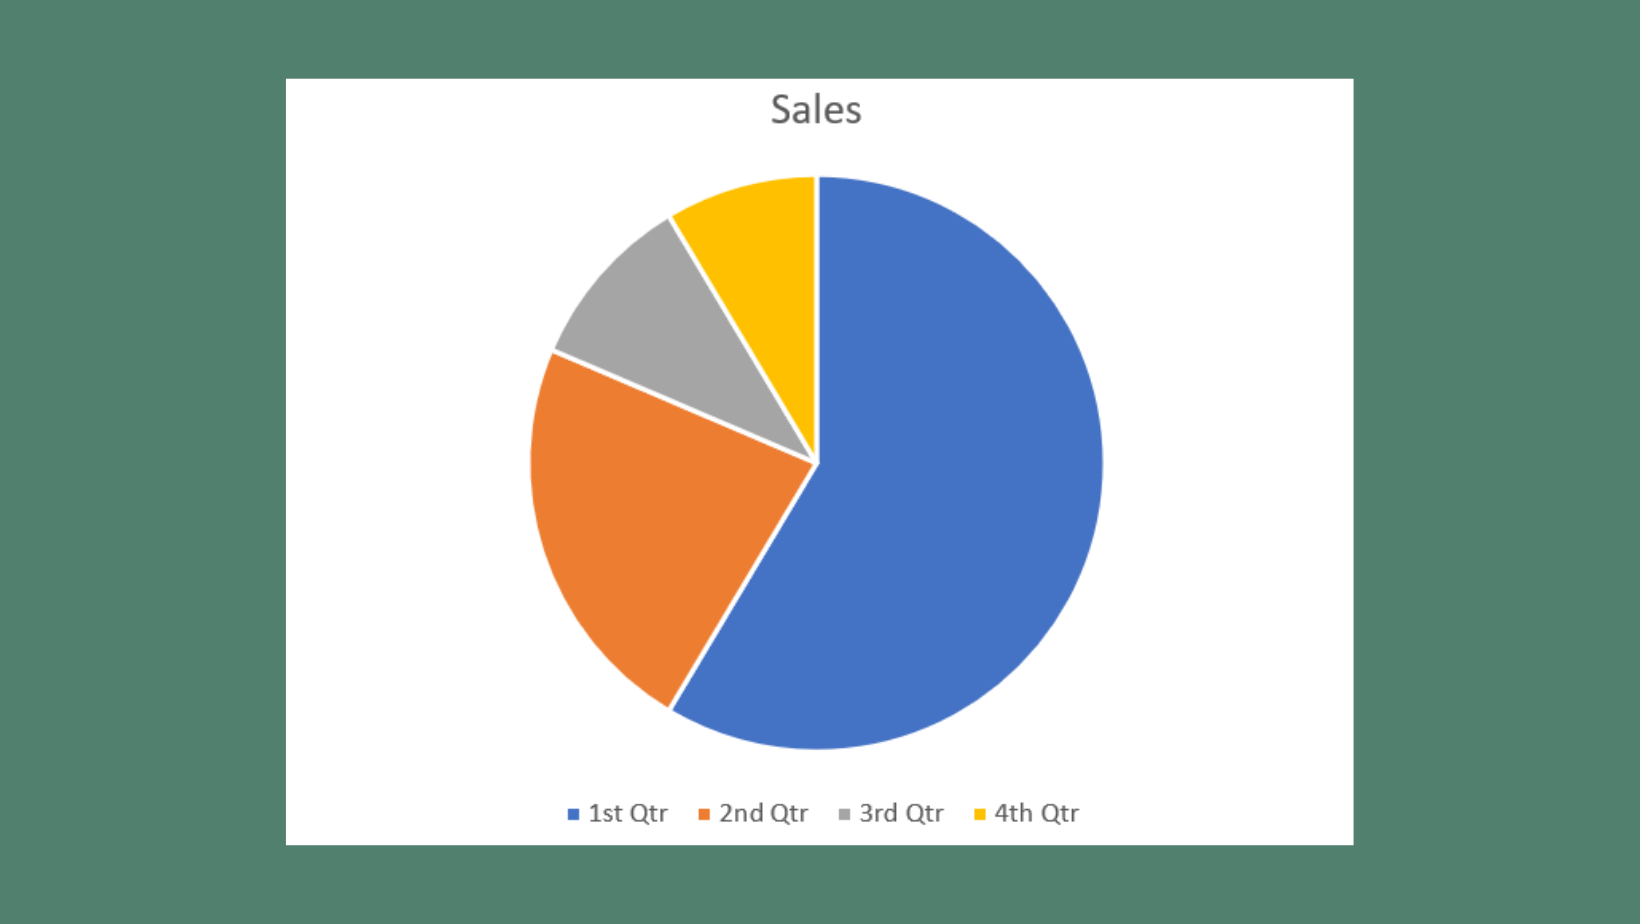 Screenshot of a pie graph titled Sales created in Microsoft Word. The pie graph consists of four slices of different colors, with blue being the largest, followed by orange, gray, and yellow. The legend positioned below the pie graph indicates the blue represents the 1st quarter, orange represents the 2nd quarter, gray represents the 3rd quarter, and yellow represents the 4th quarter.